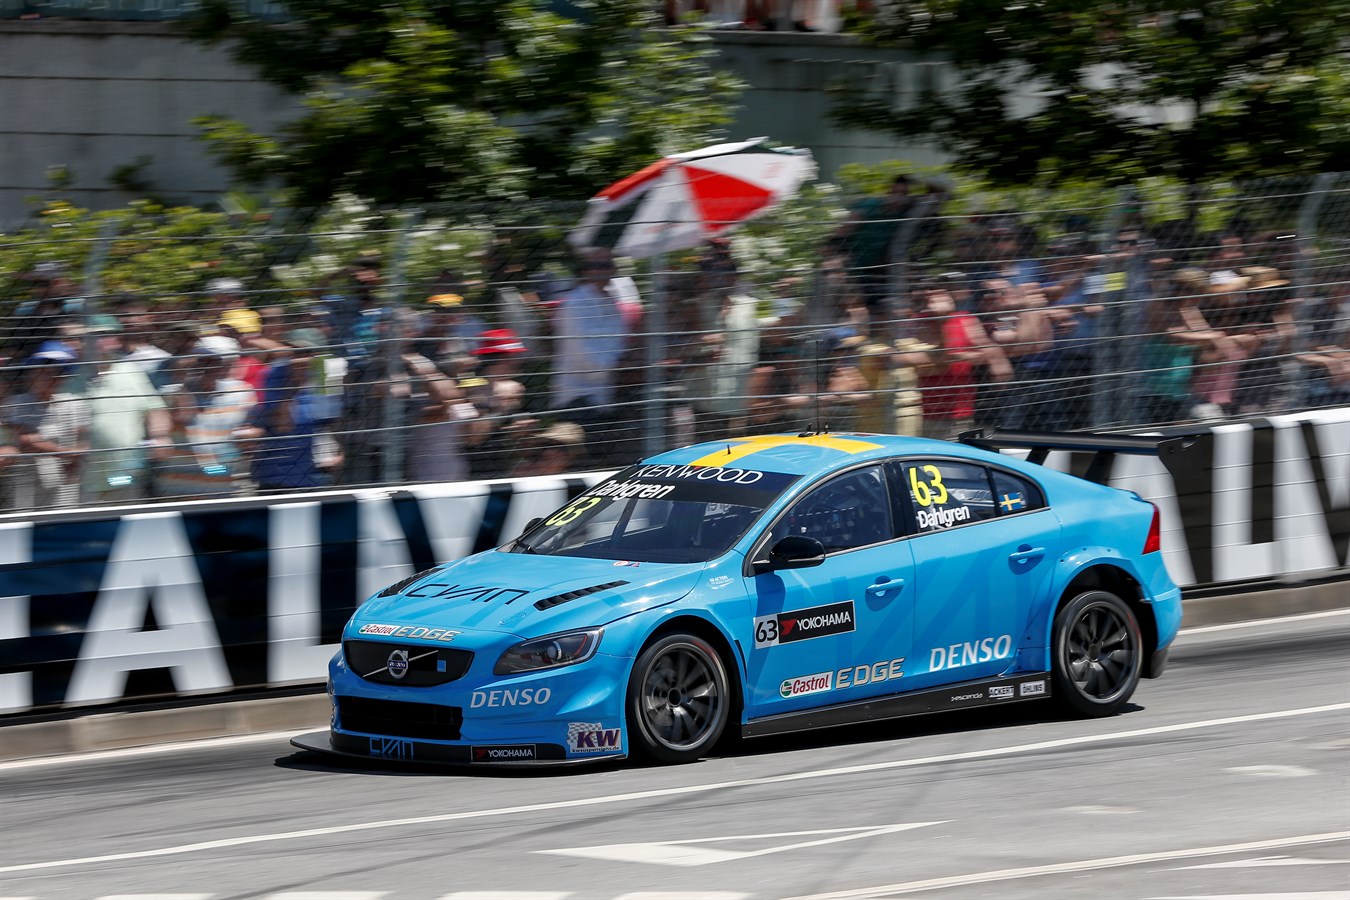 The WTCC summer break is over as racing resumes in Argentina